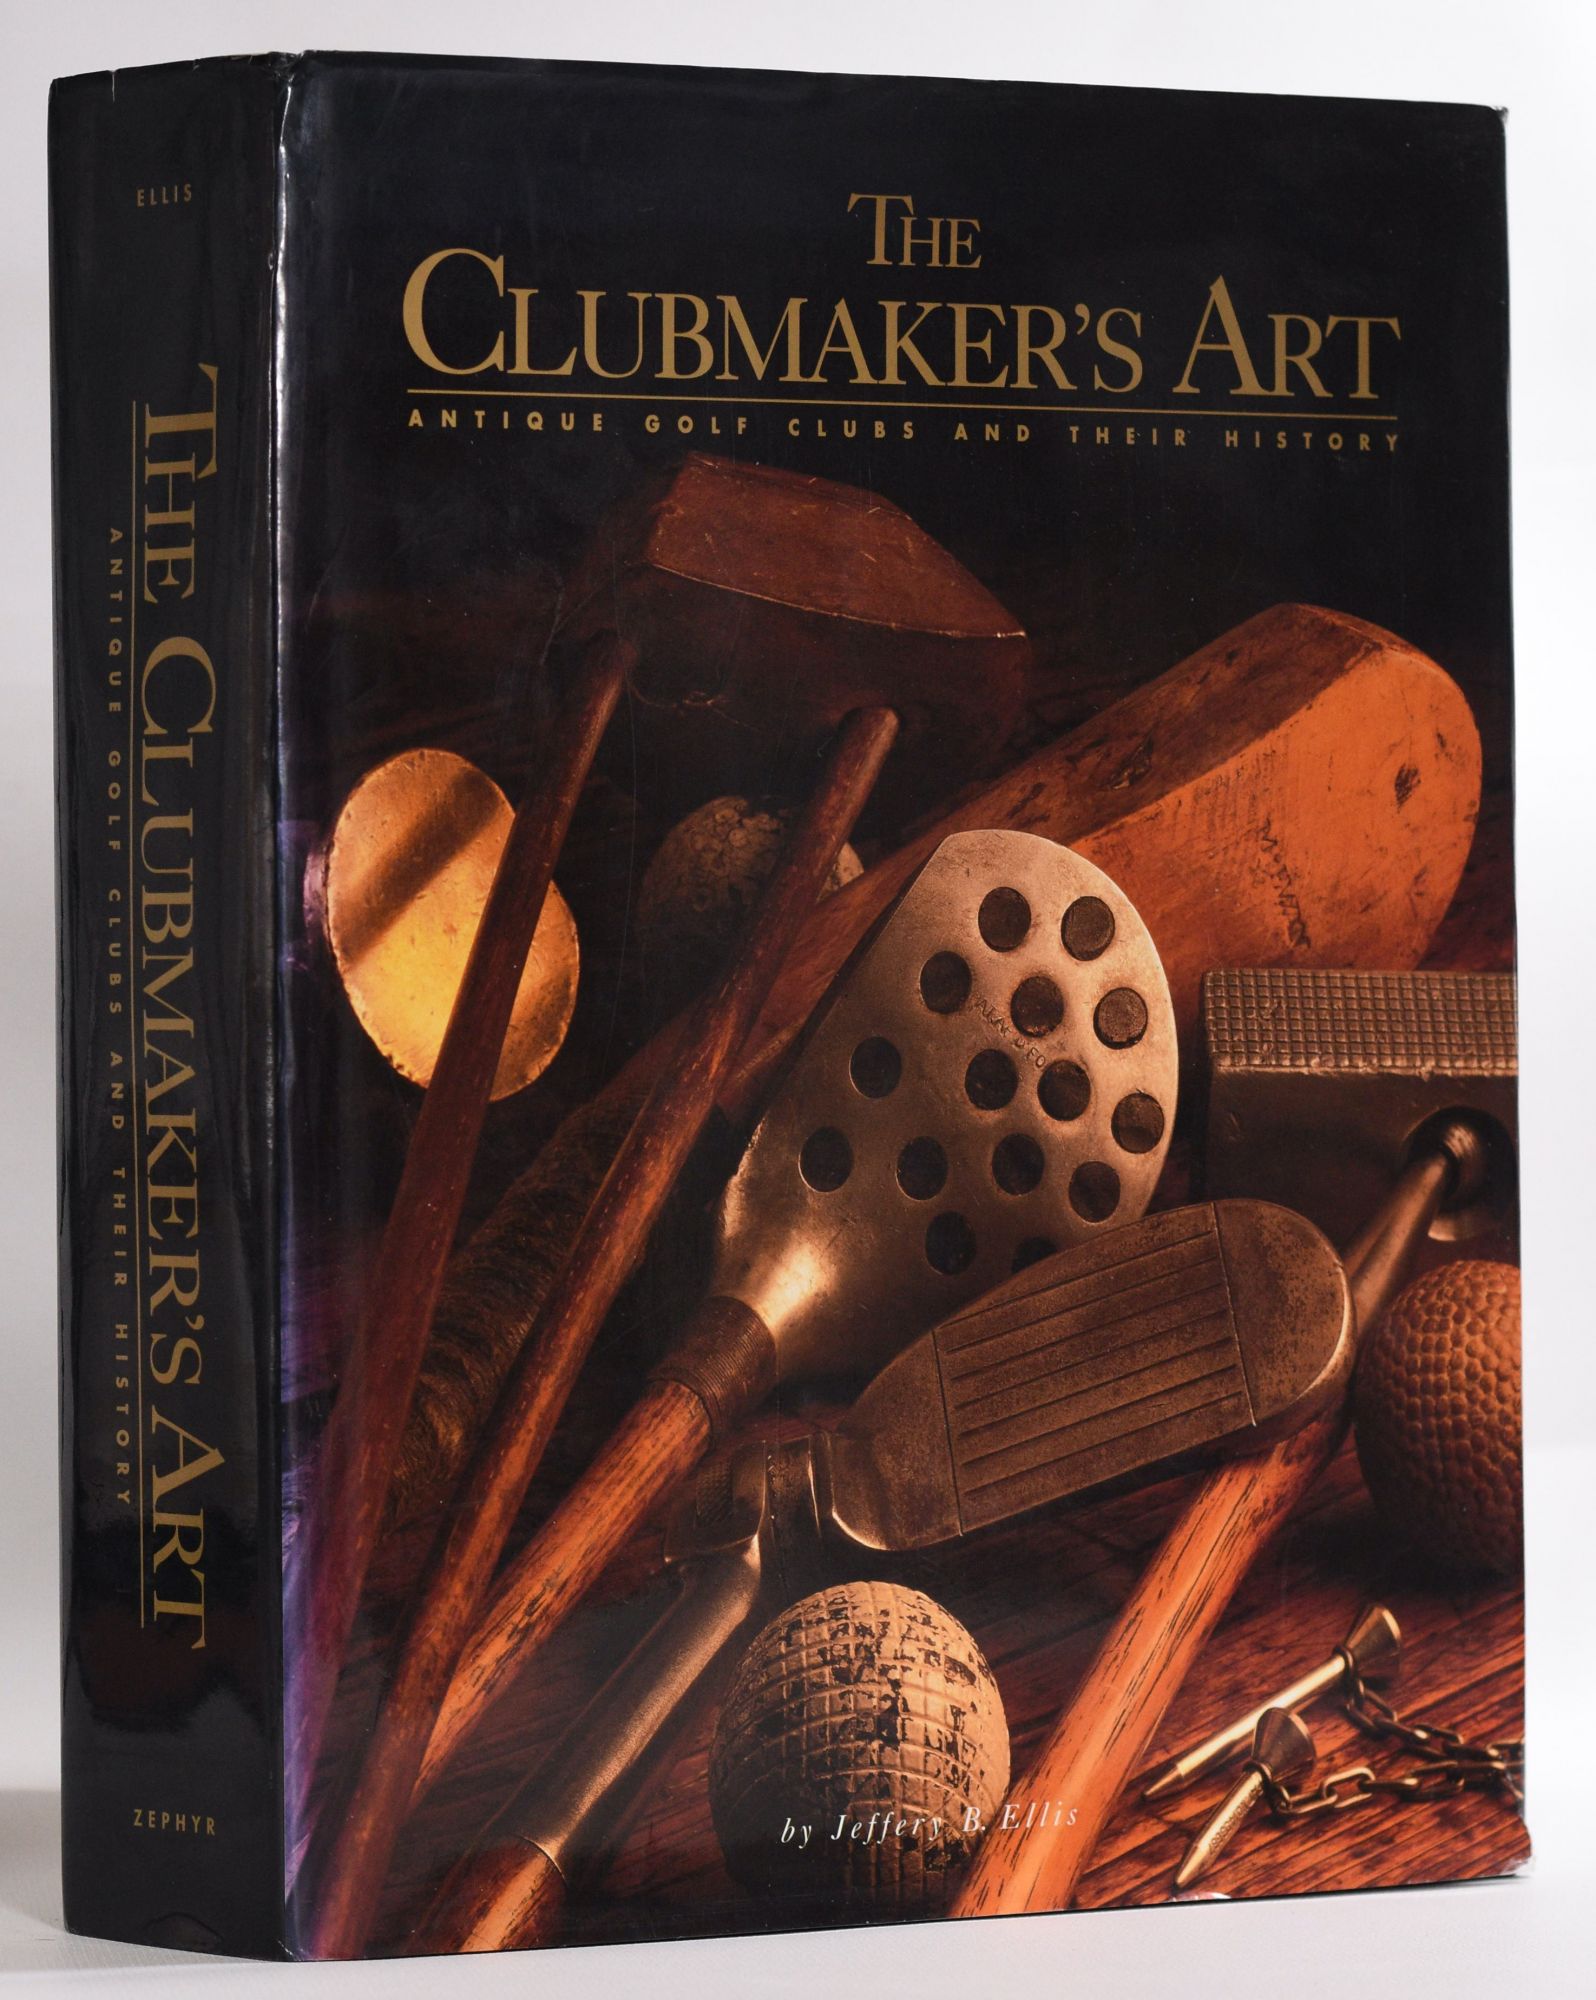 The Clubmaker's Art: Antique Golf Clubs & Their History by Ellis, Jeff;  Ellis, Jeffery B.: Very Good Hardcover (1997) 1st Edition., Signed by  Author